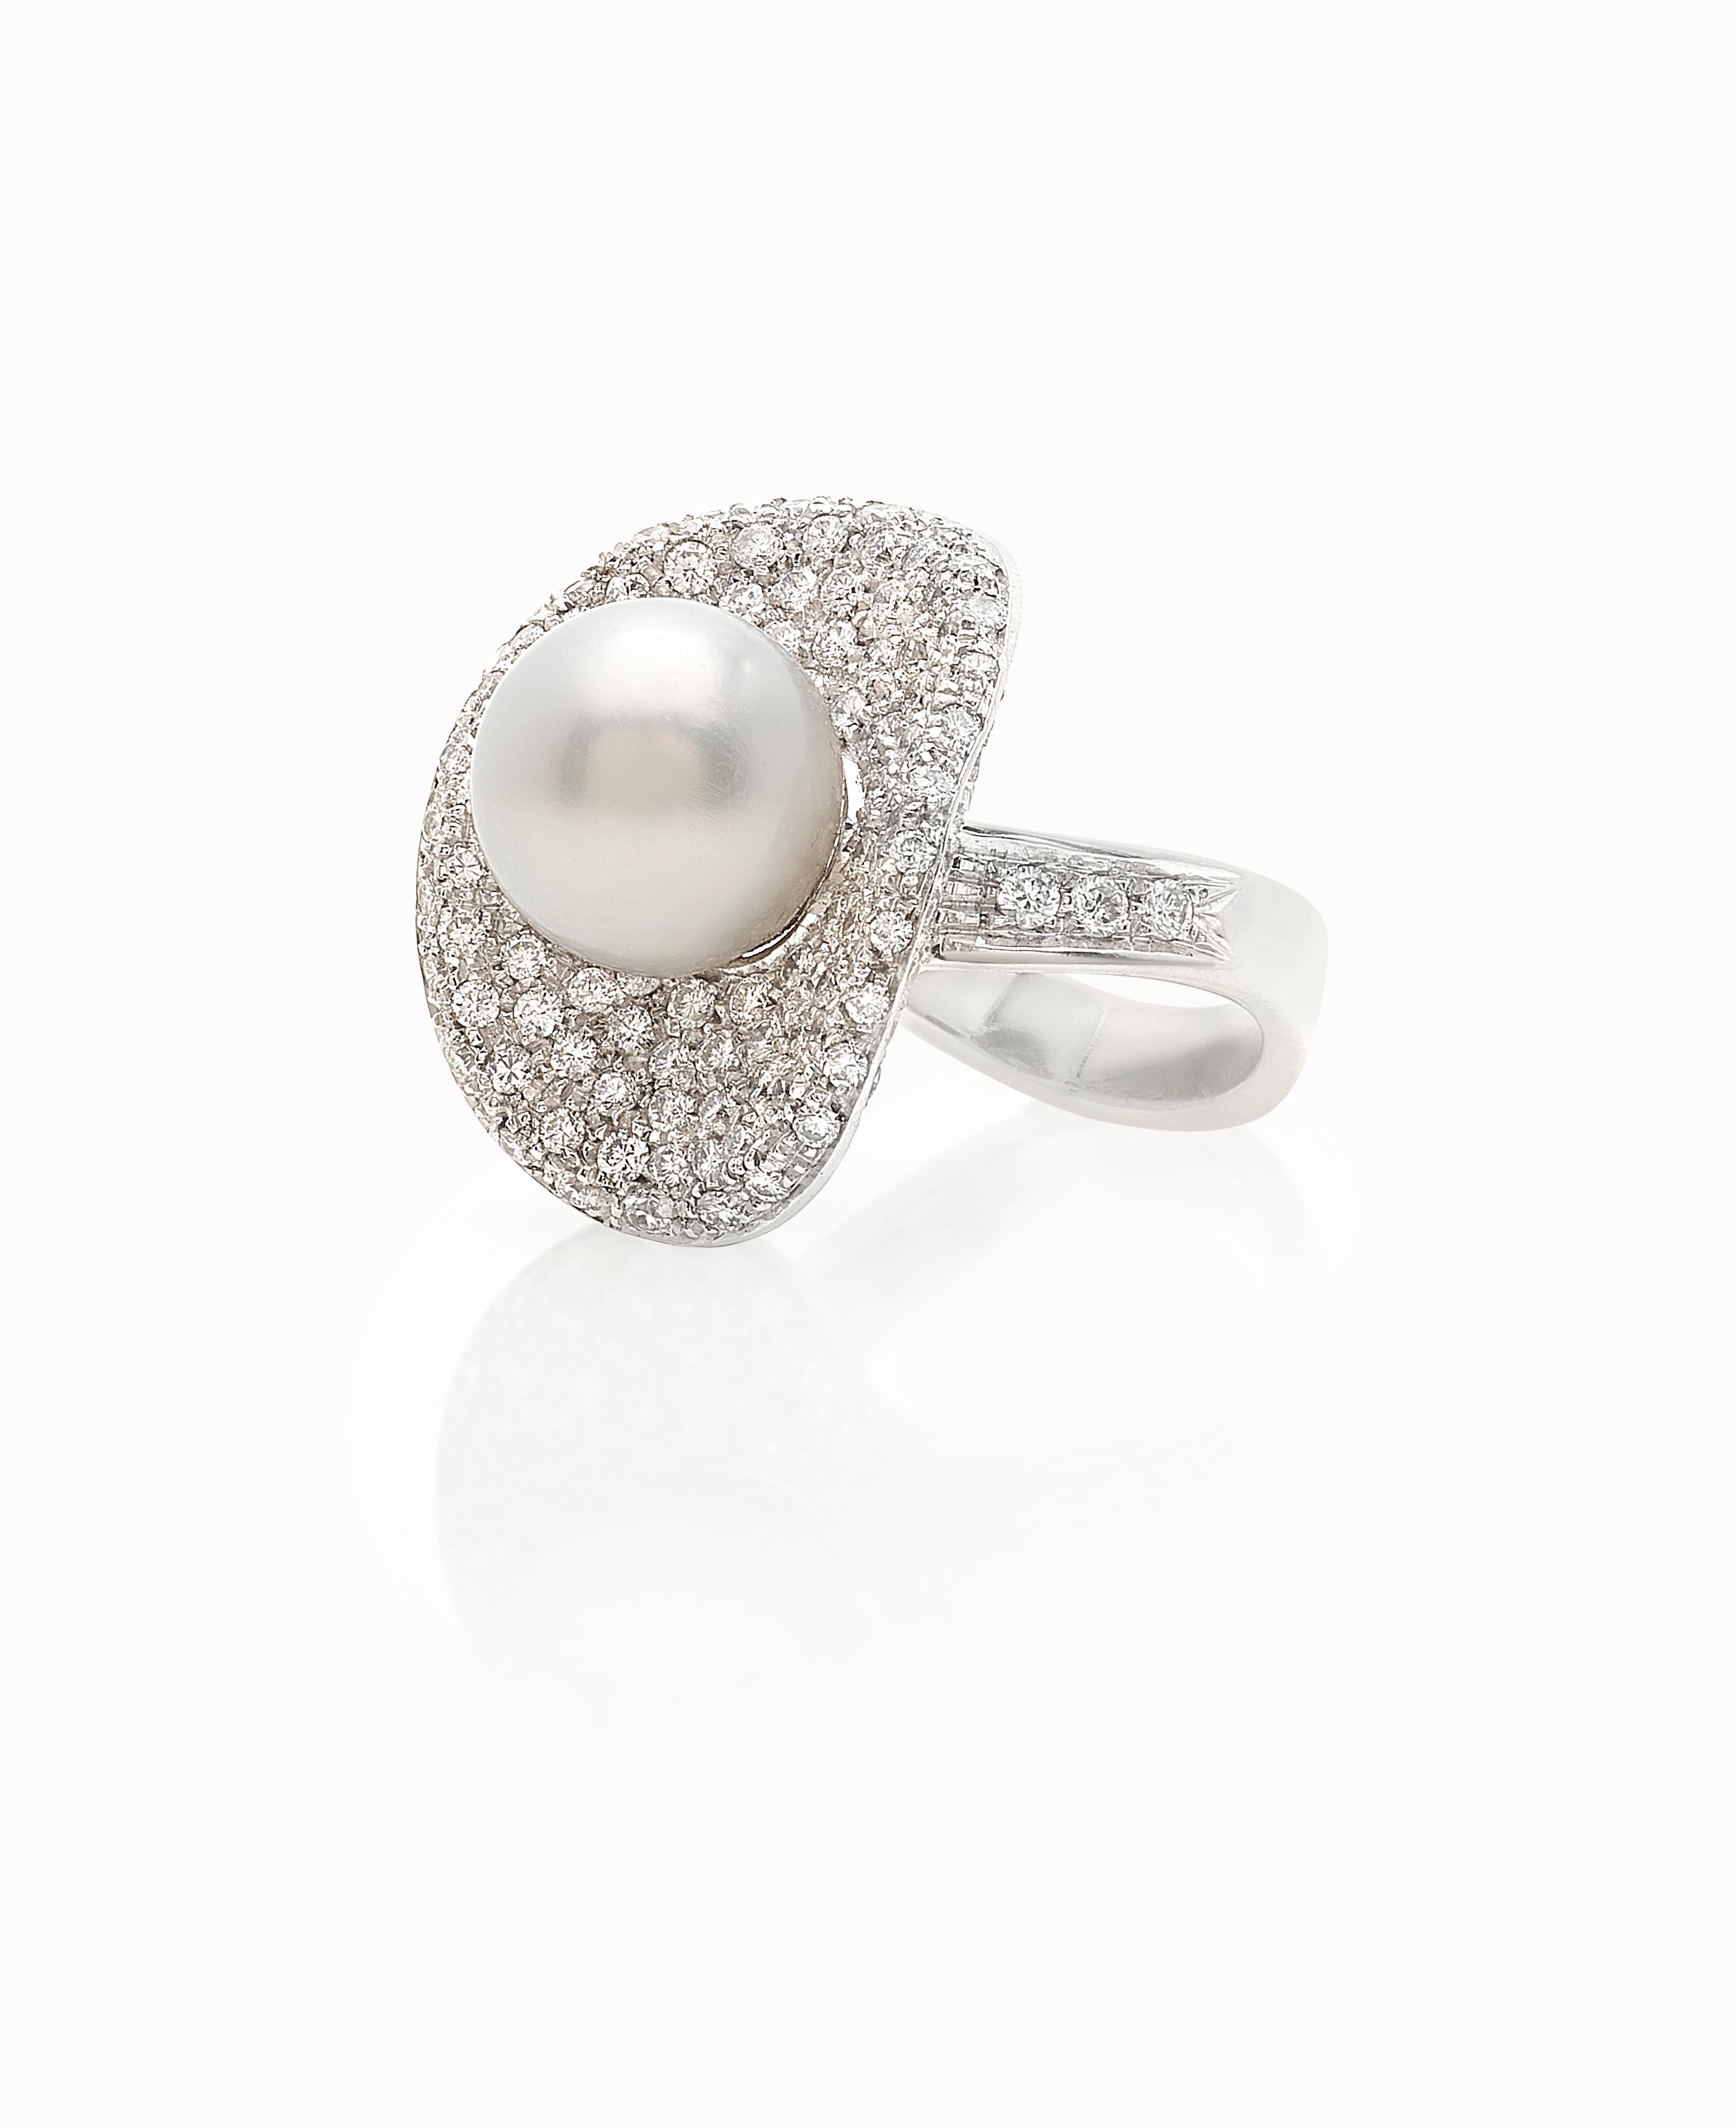 The hat-shaped ring is an artisanal object in white gold made by artisans in Naples.
 The central Australian sea pearl of 0.12 mm  is set in a white diamond leaf,  that recalls the shape of a wide-brimmed hat.
The sinuous line and the wearability of